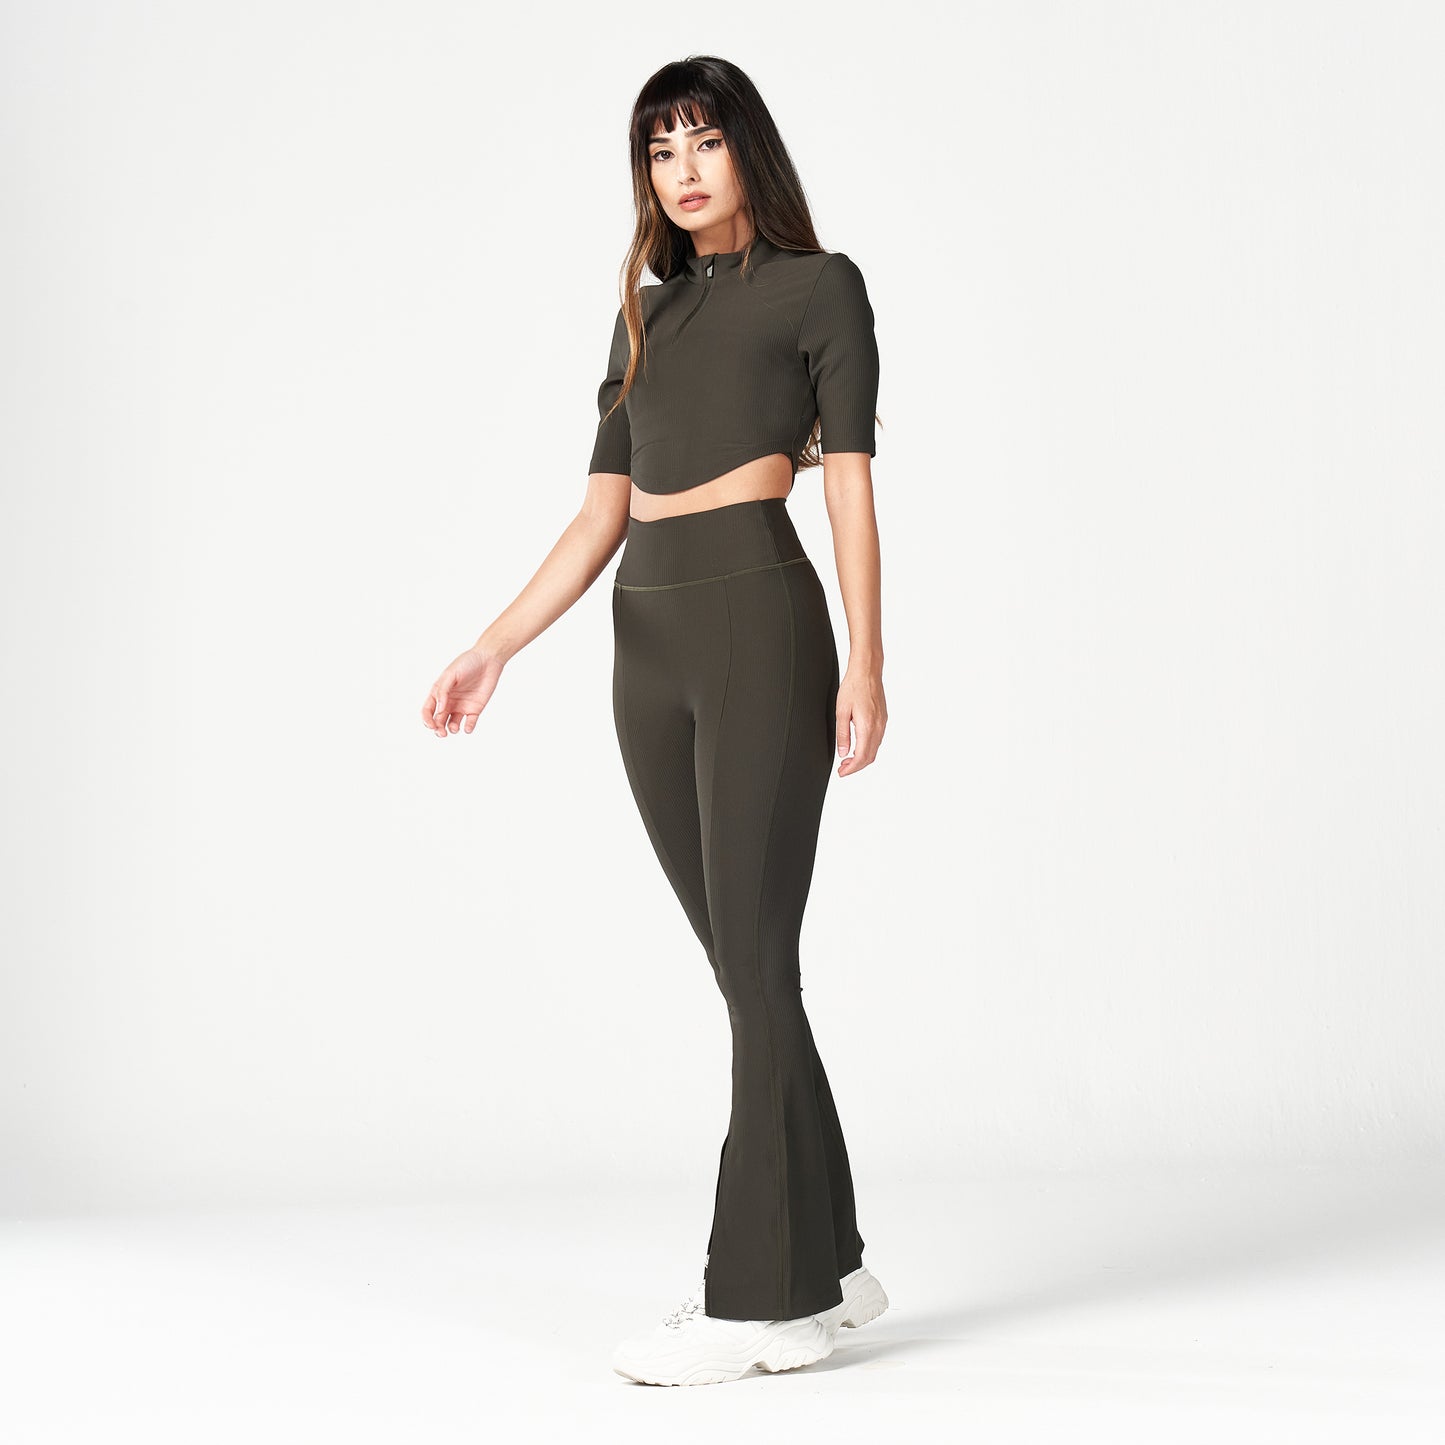 squatwolf-workout-clothes-code-flare-it-up-trousers-khaki-gym-pants-for-women